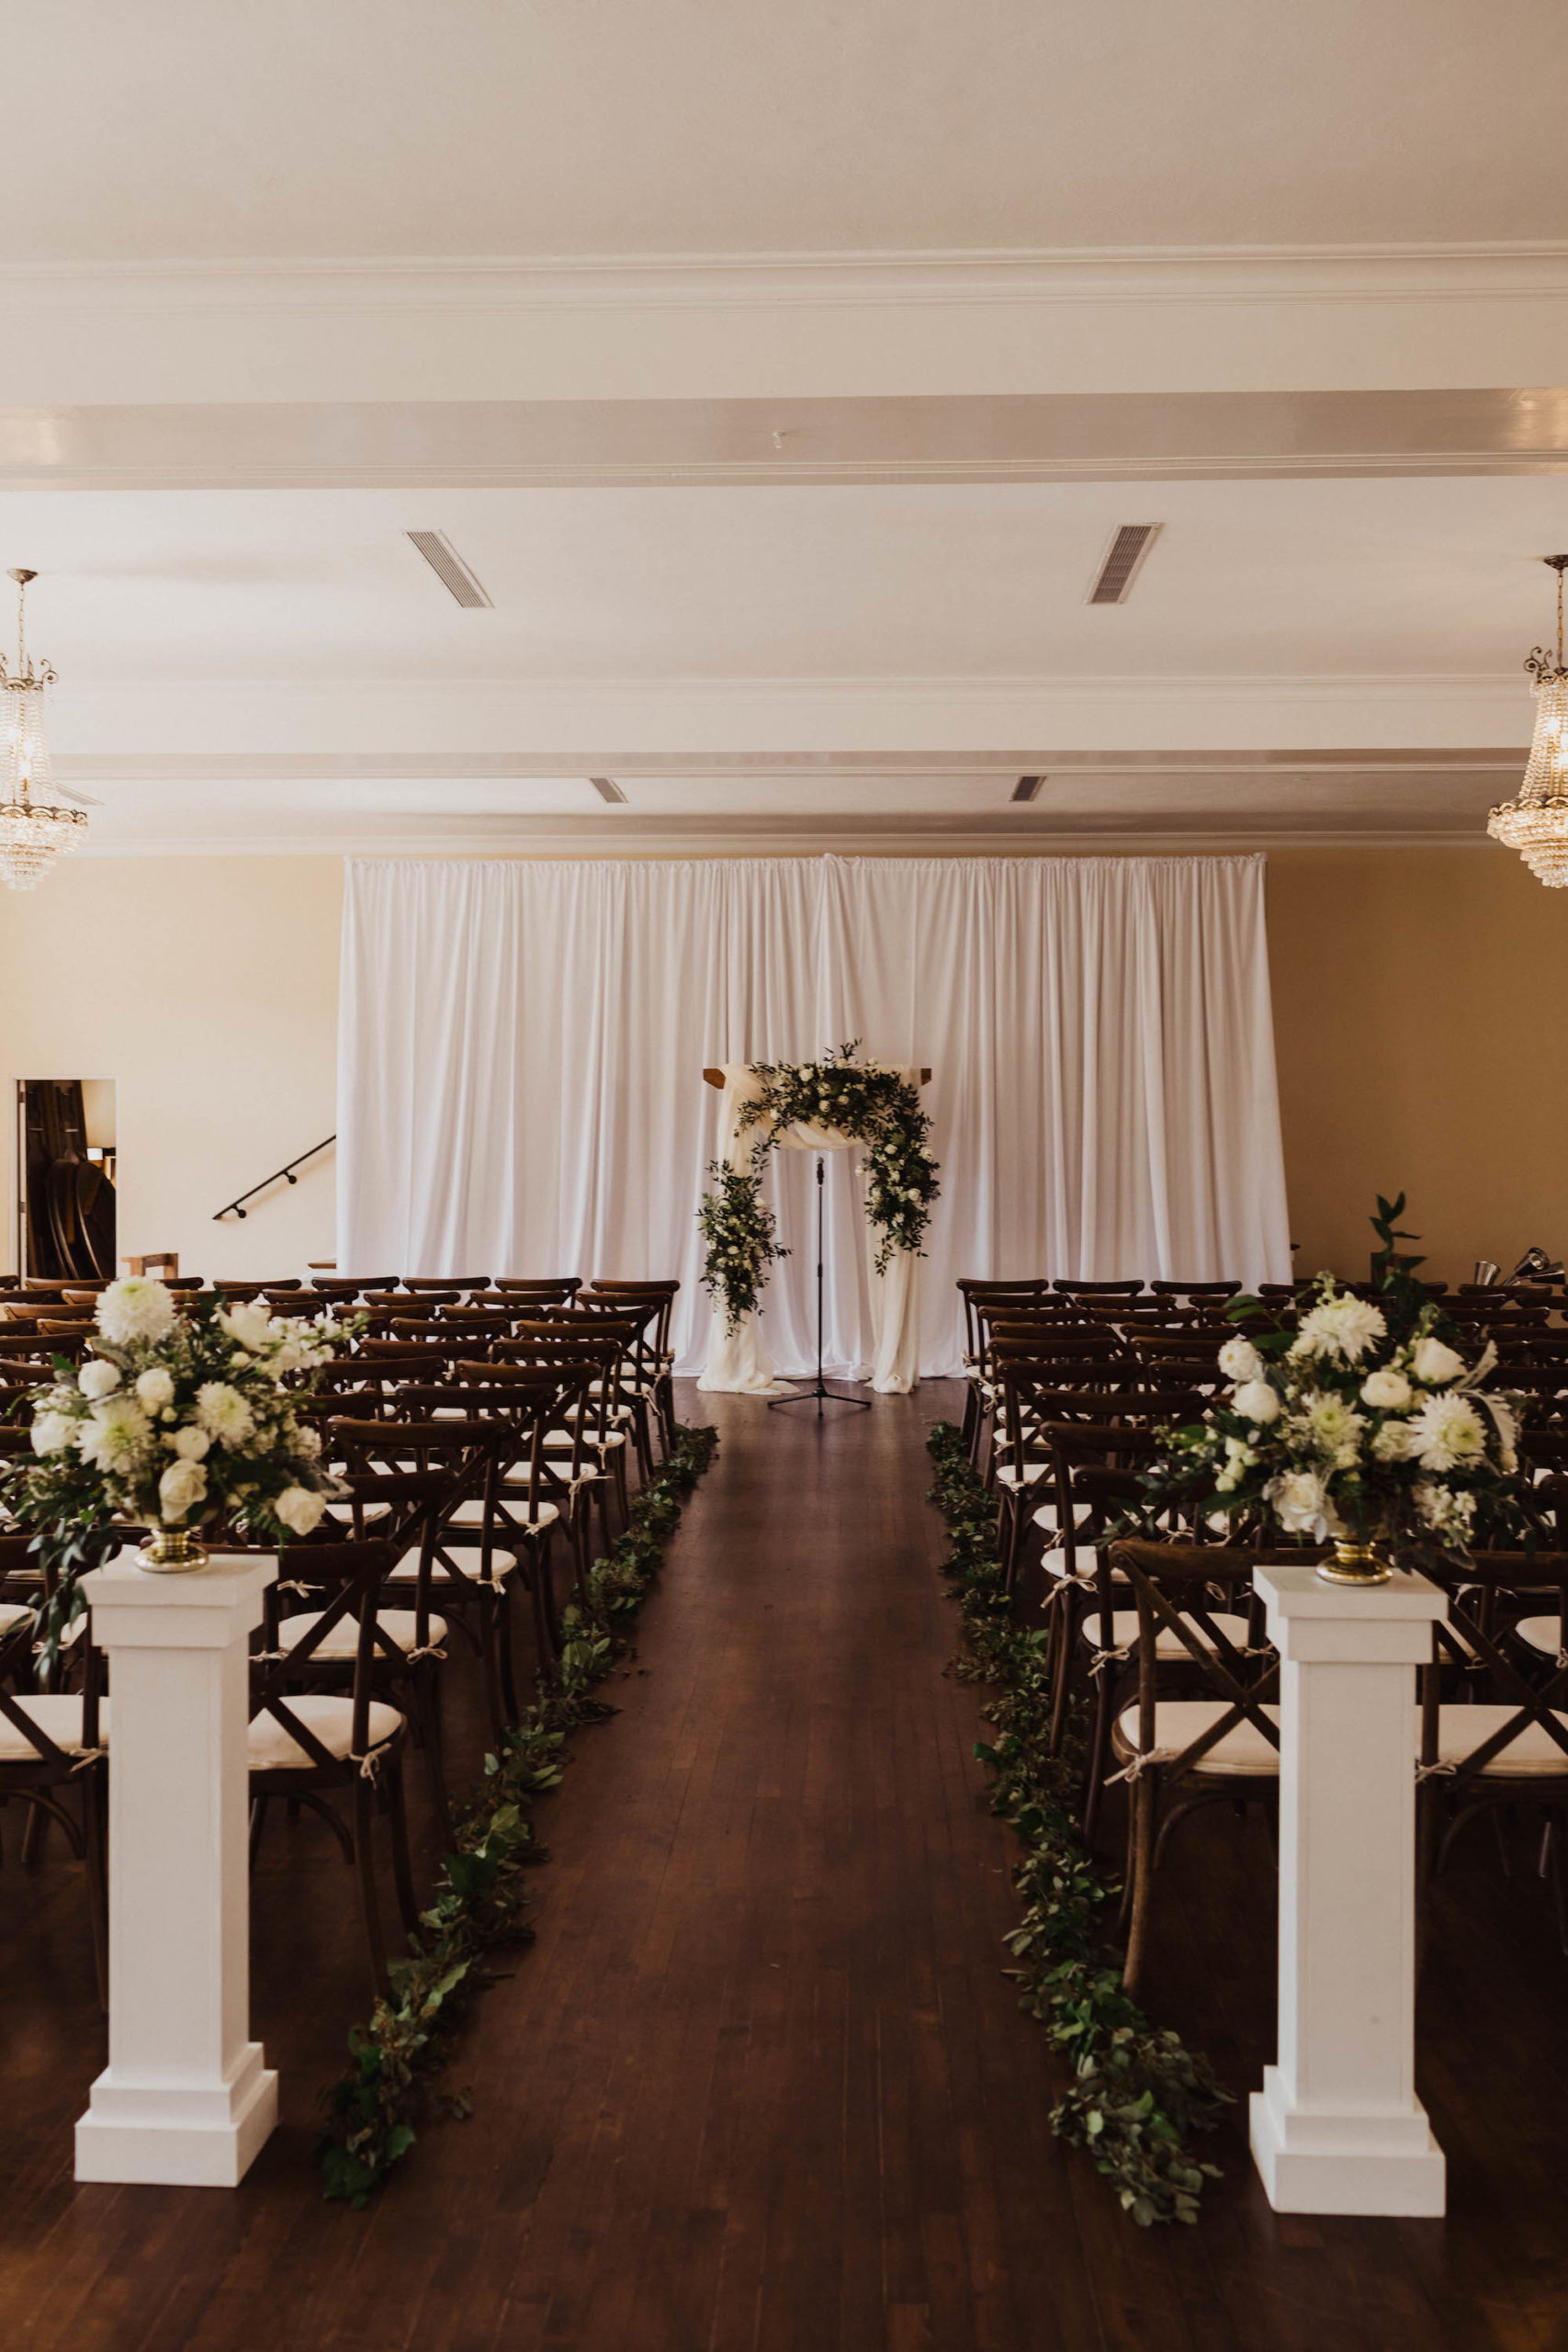 Simple Elegant Wedding Ceremony Decor, Mahogany Chiavari Chairs, White Pedestals with Ivory Roses and Eucalyptus Arrangements, White Draping and Arch | South Tampa Wedding Venue The Orlo